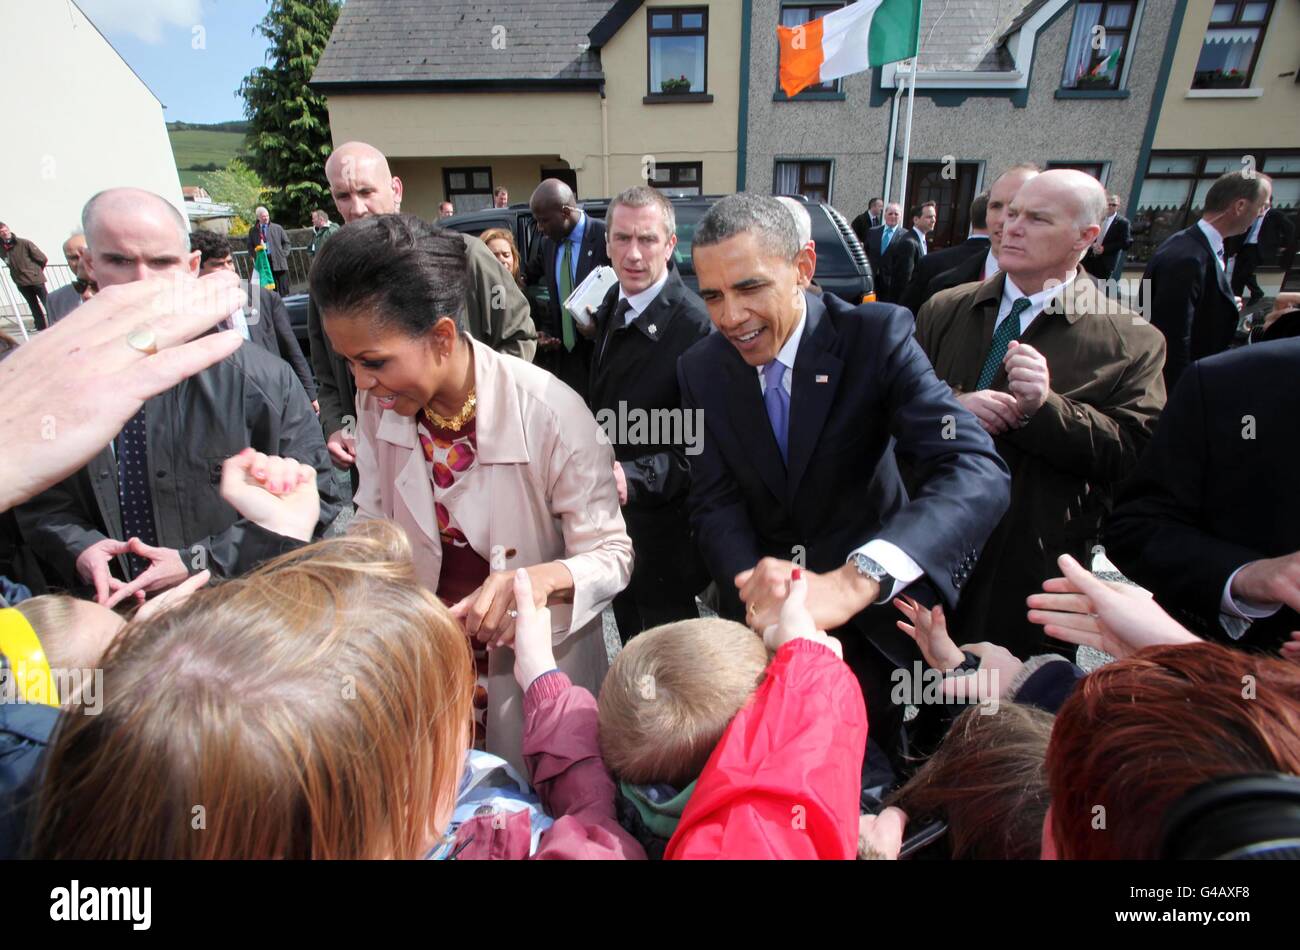 US President Barack Obama and his wife Michelle greet well wishers in Moneygall, County Offaly, during his visit to Ireland. Stock Photo